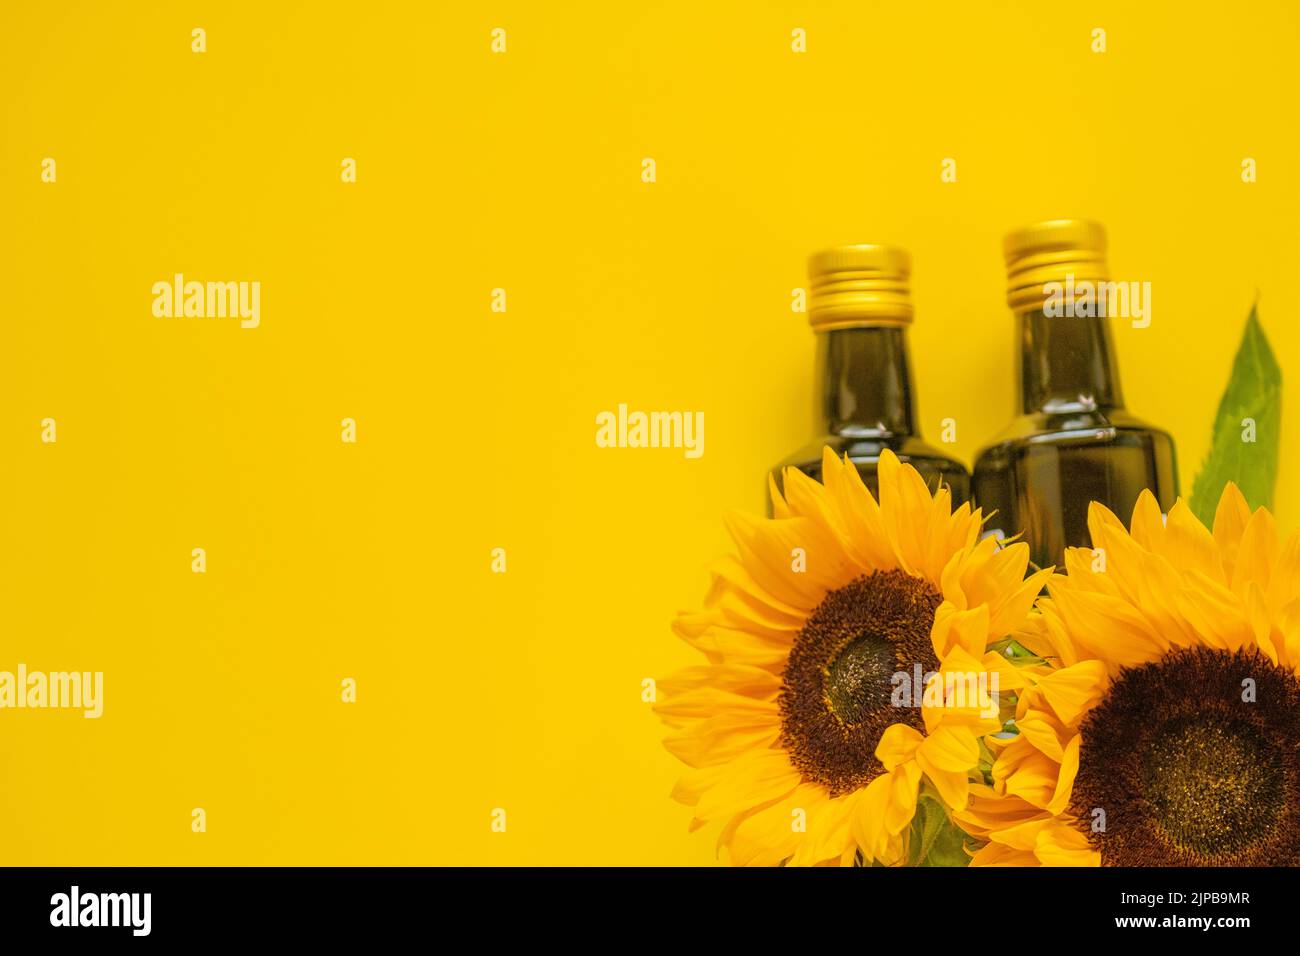 Sunflower oil. Oil bottles and sunflowers on a bright yellow background.Organic natural farm sunflower oil. Edible oils.top view, copy space Stock Photo